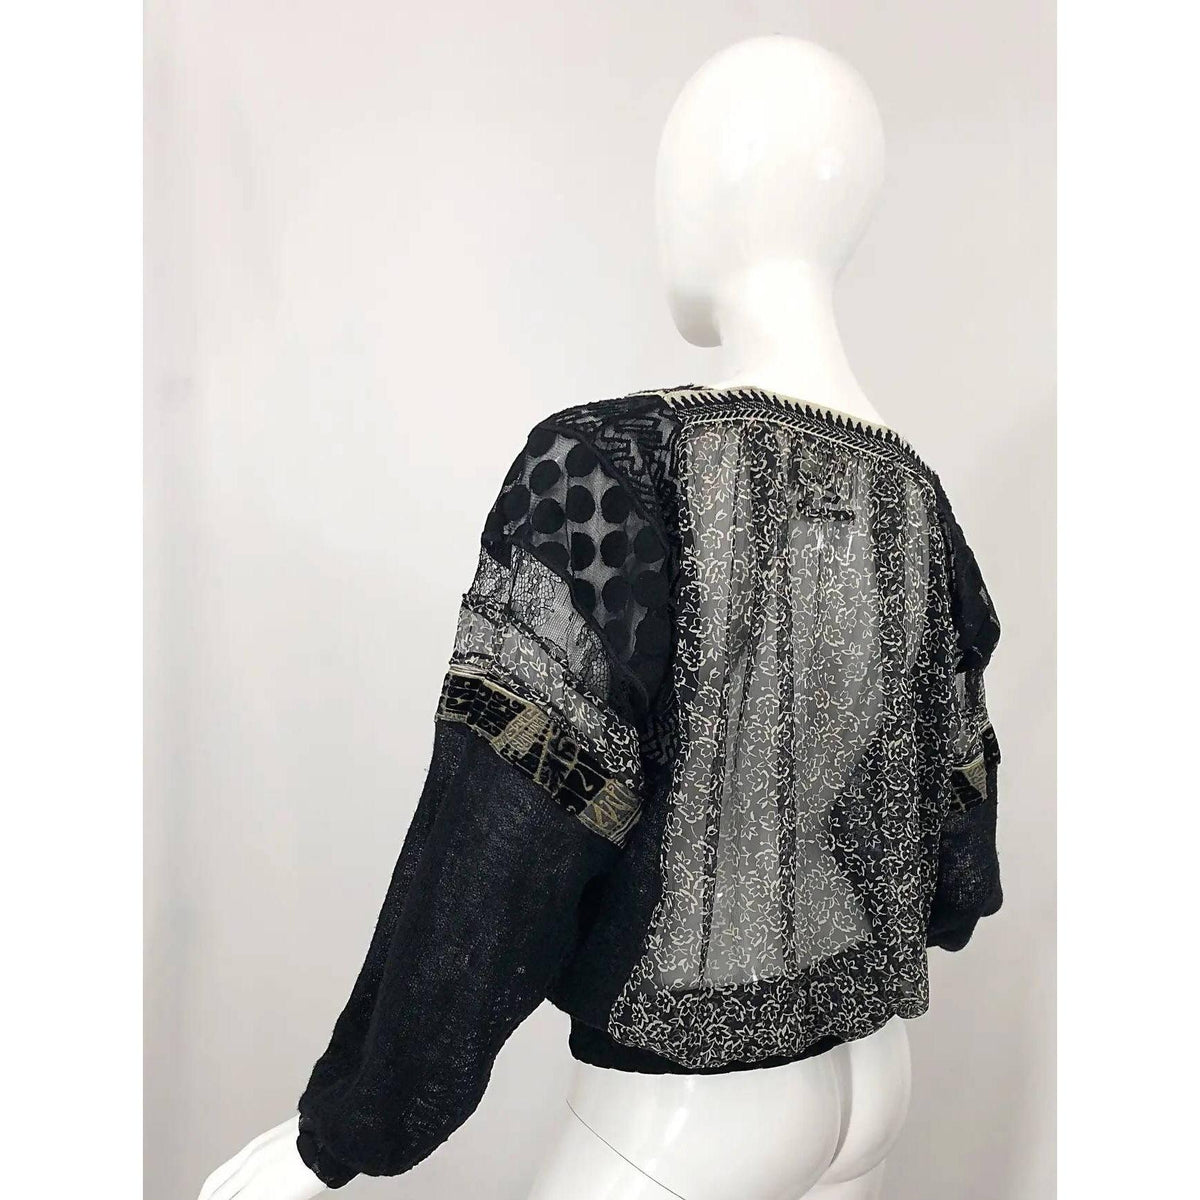 Pre-Owned JEAN PAUL GAULTIER Hand Painted Rapunzel Print Black Sheer Blouse - theREMODA